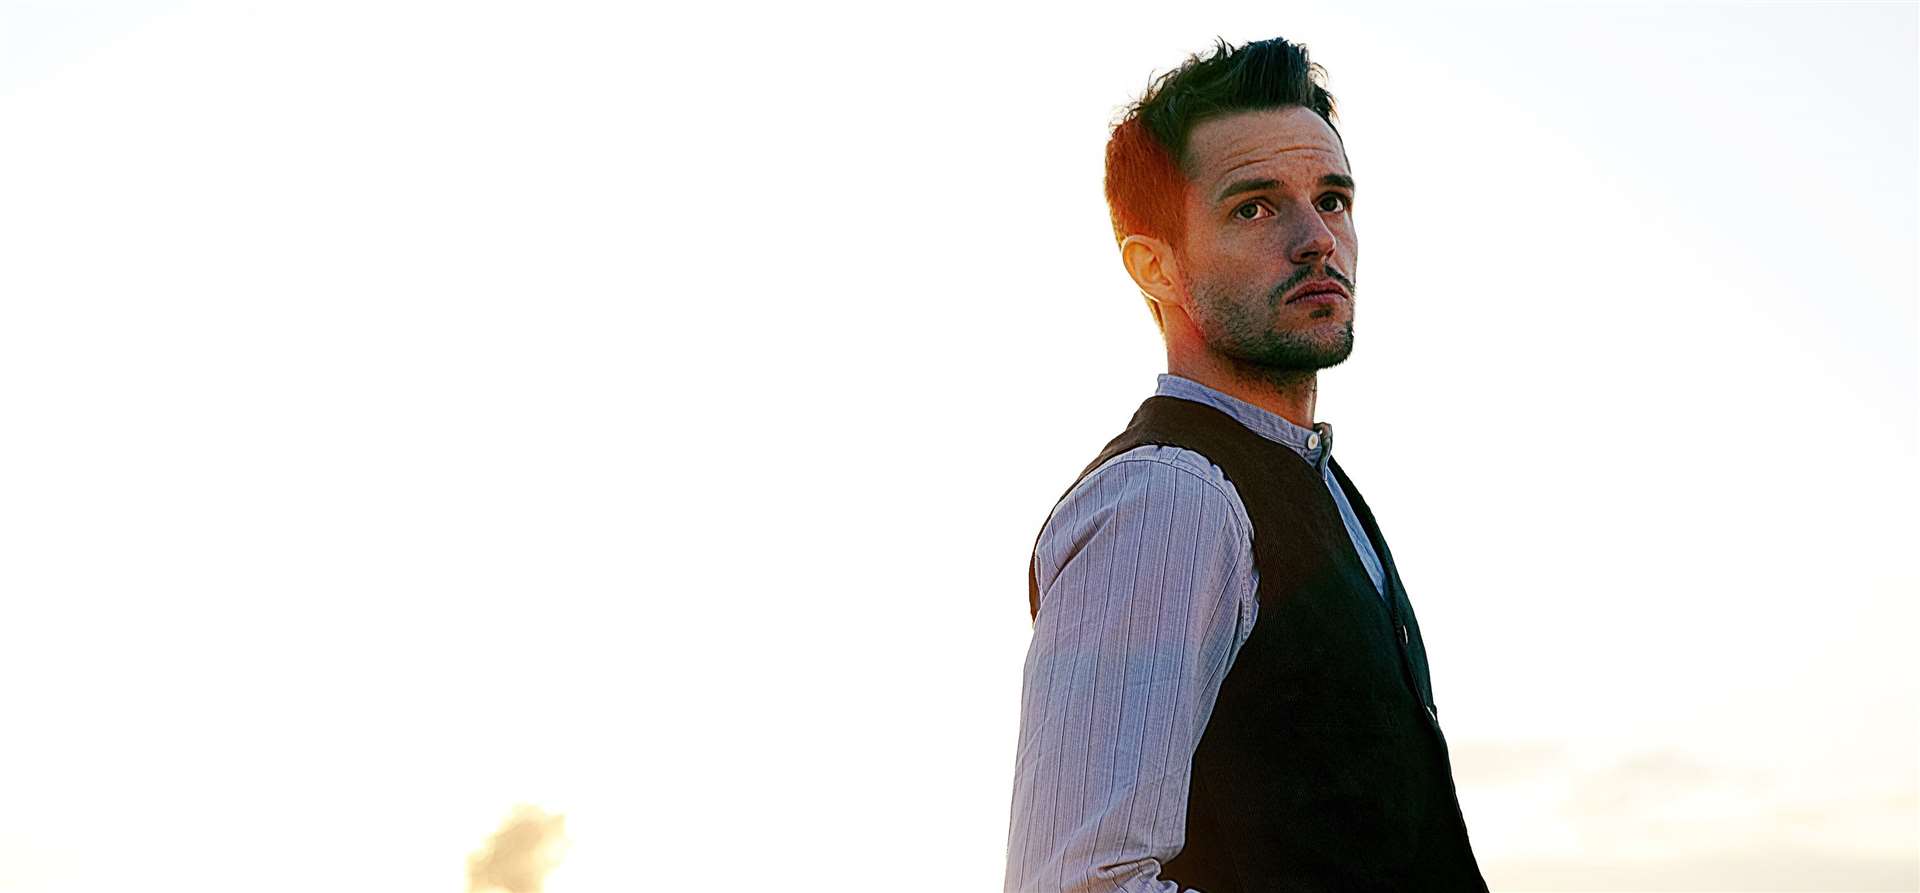 The Killers, including frontman Brandon Flowers, will be screened as part of Glastonbury Festival highlights at Dreamland Picture: Nikolai Grune